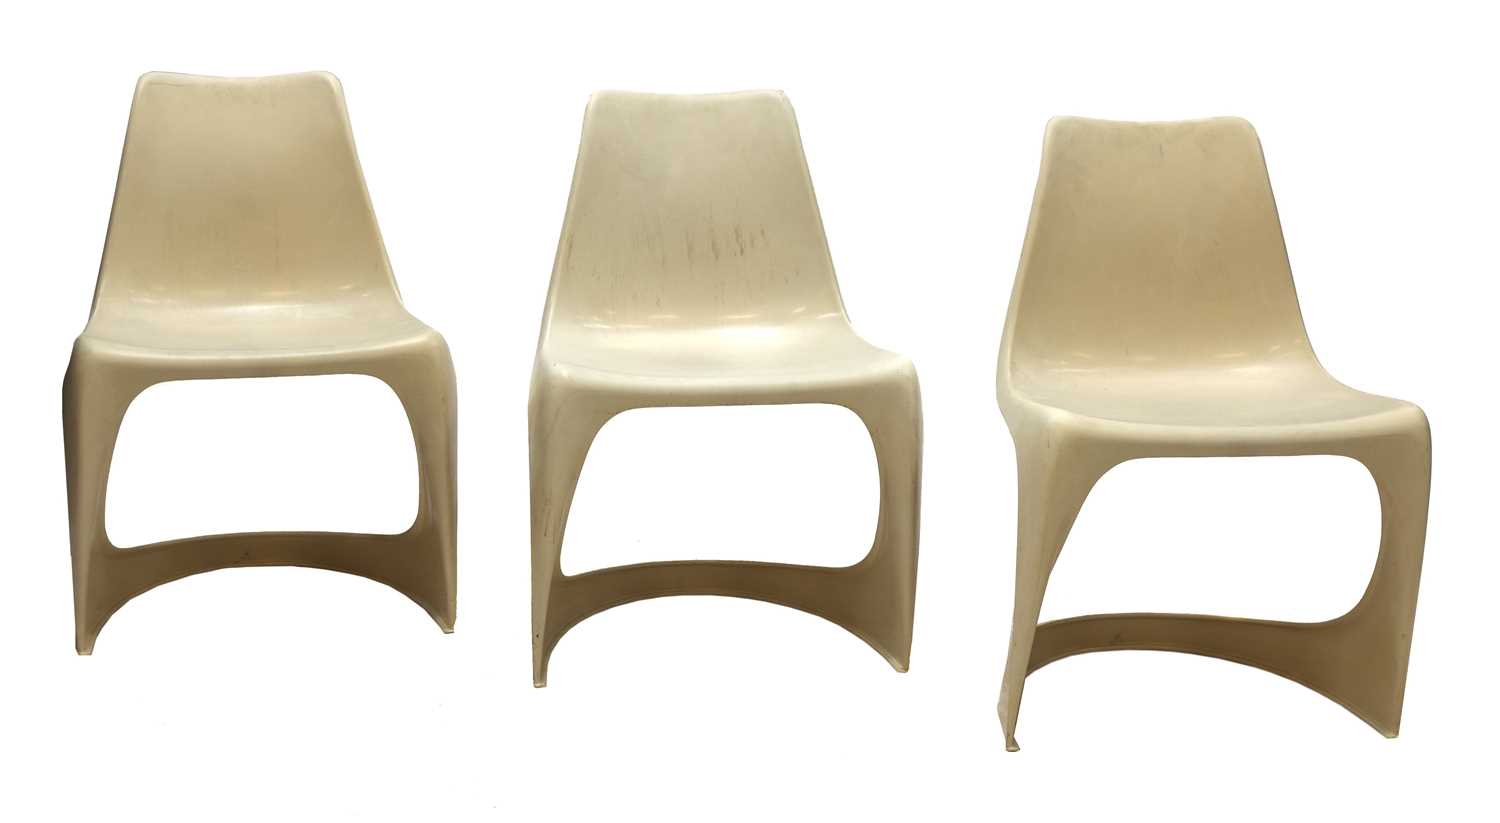 Three Cado moulded plastic stacking chairs, - Image 3 of 3